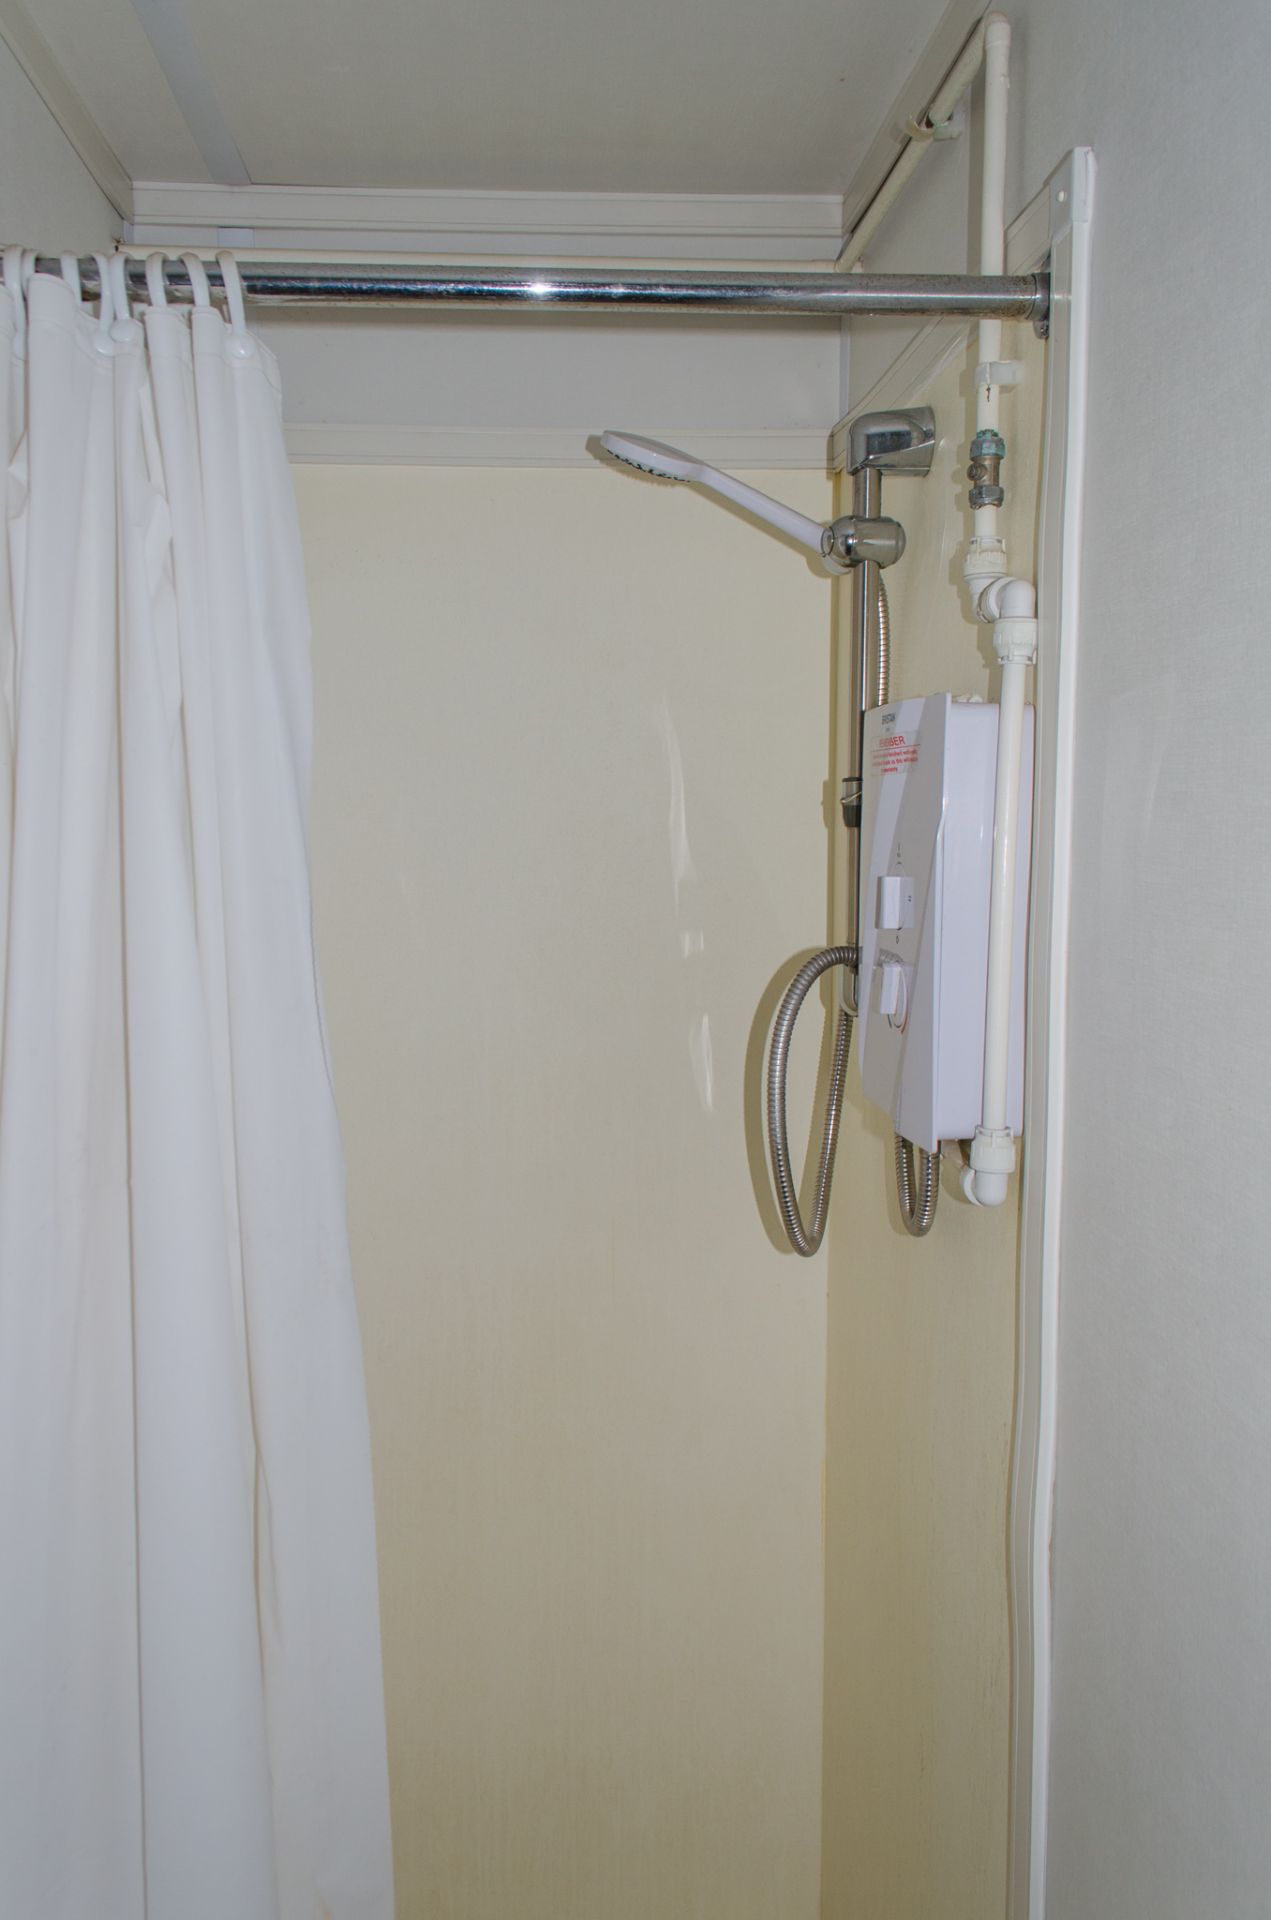 32 ft x 10 ft steel jack leg shower site unit Comprising of 8 - showers & changing area BBA1684 - Image 9 of 14